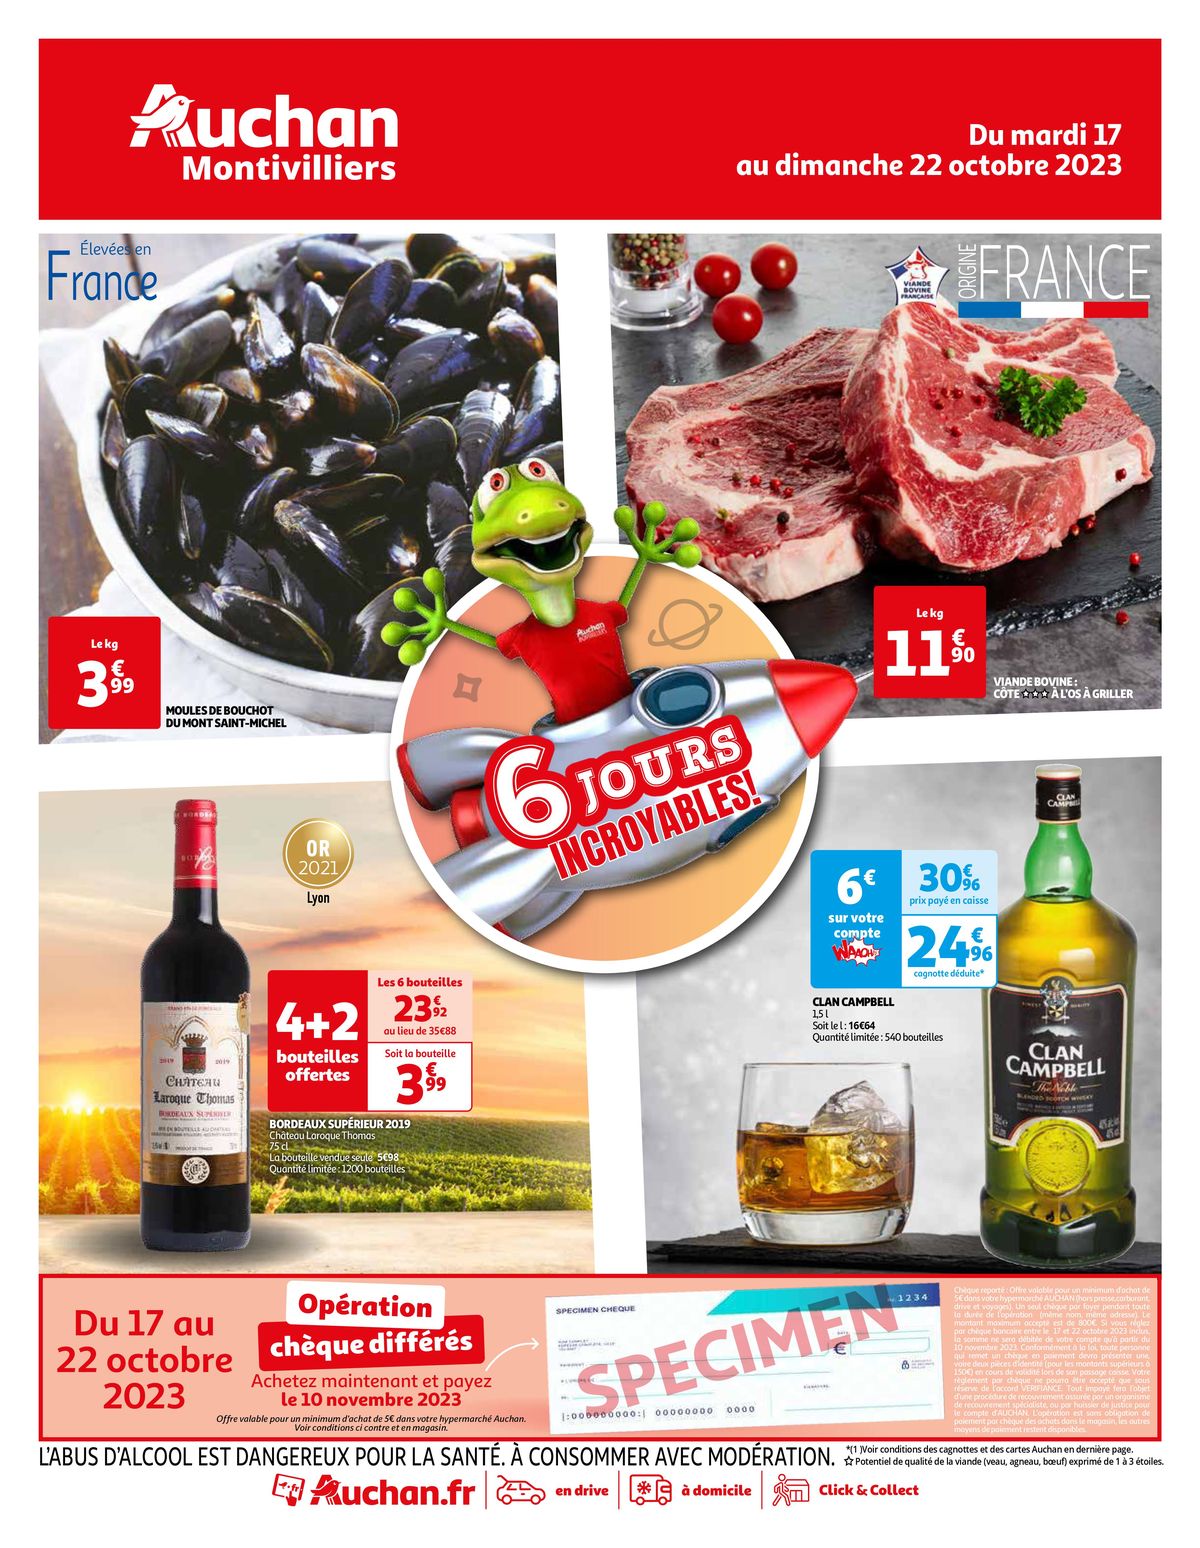 Catalogue Tract 6 jours incroyables Auchan Montivilliers, page 00001